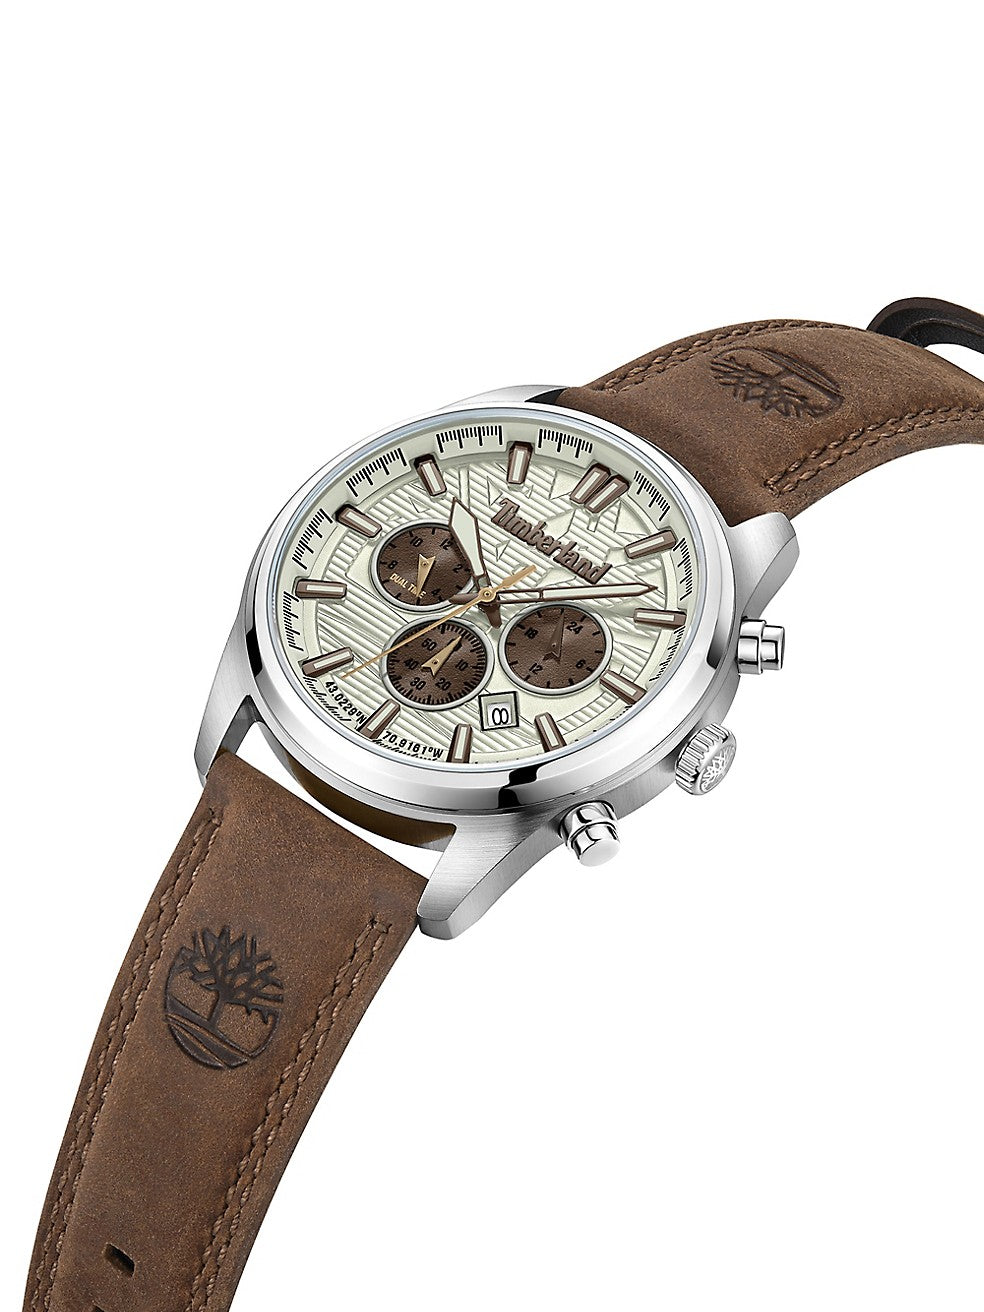 Product description: A Timberland Northbridge Stainless Steel & Leather Strap Chronograph Watch with a brown leather strap.